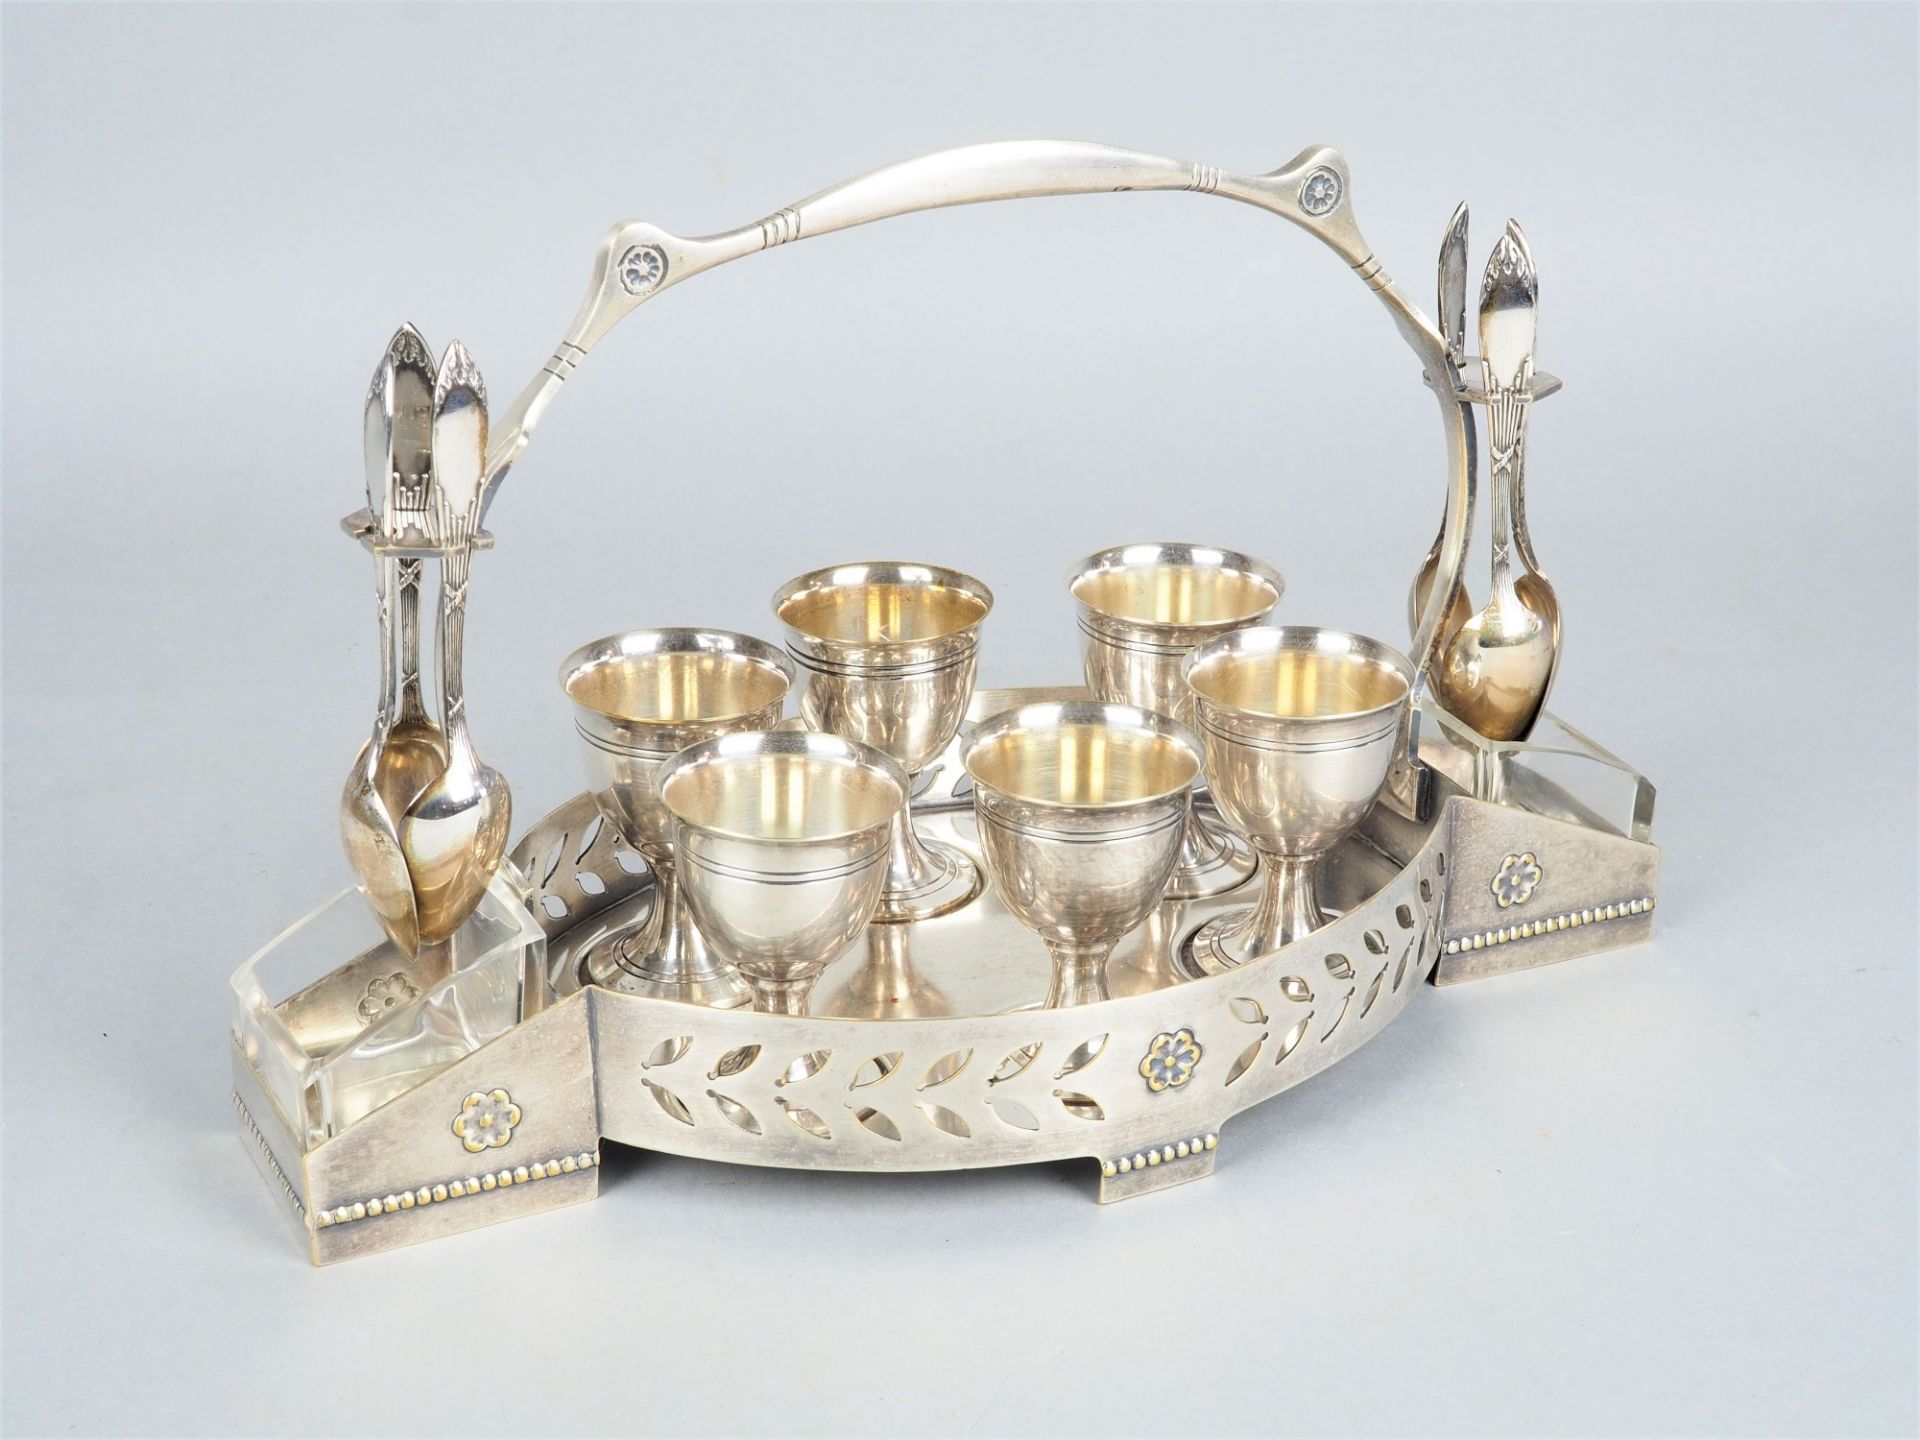 Egg cruet for 6 persons around 1900 - Image 2 of 4